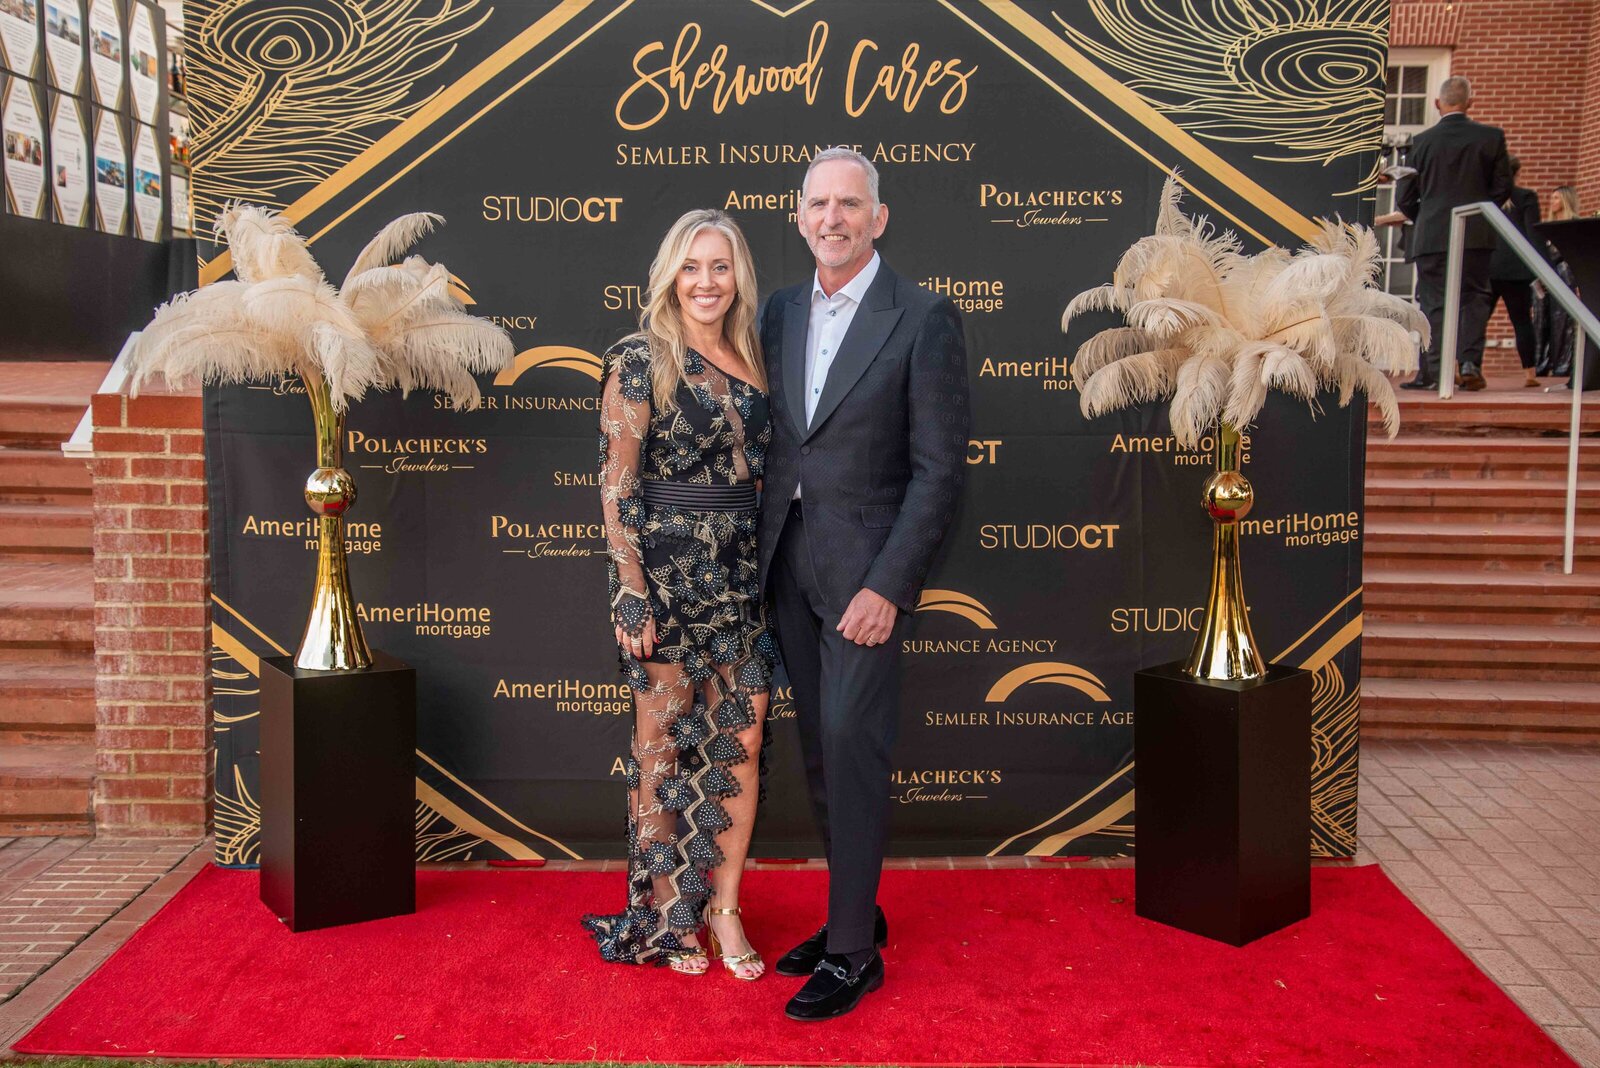 Maria-McCarthy-Photography-corporate-fundraiser-Sherwood-Cares-gala-step-repeat